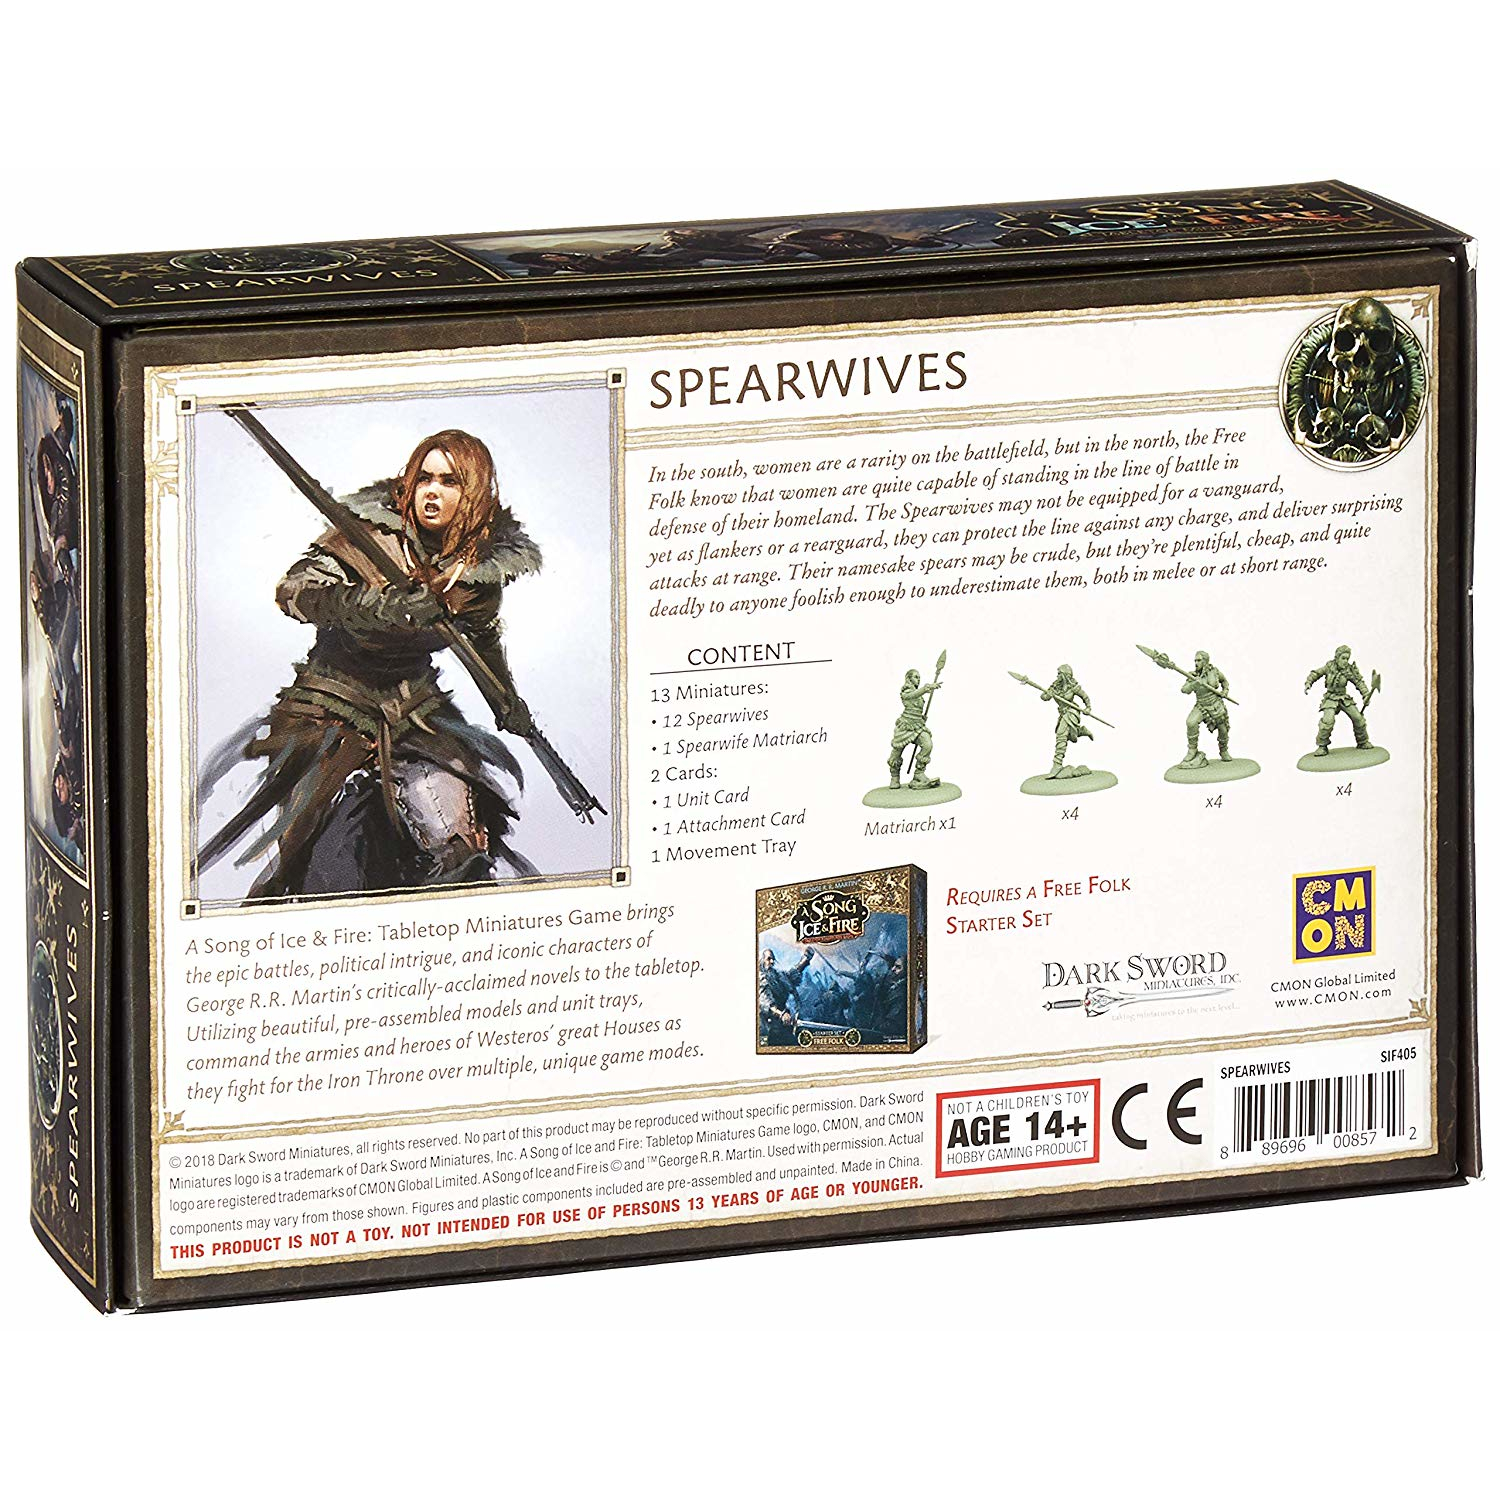 A Song of Ice and Fire: Tabletop Miniatures Game Free Folk Spearwives Unit Box, by CMON - image 2 of 7